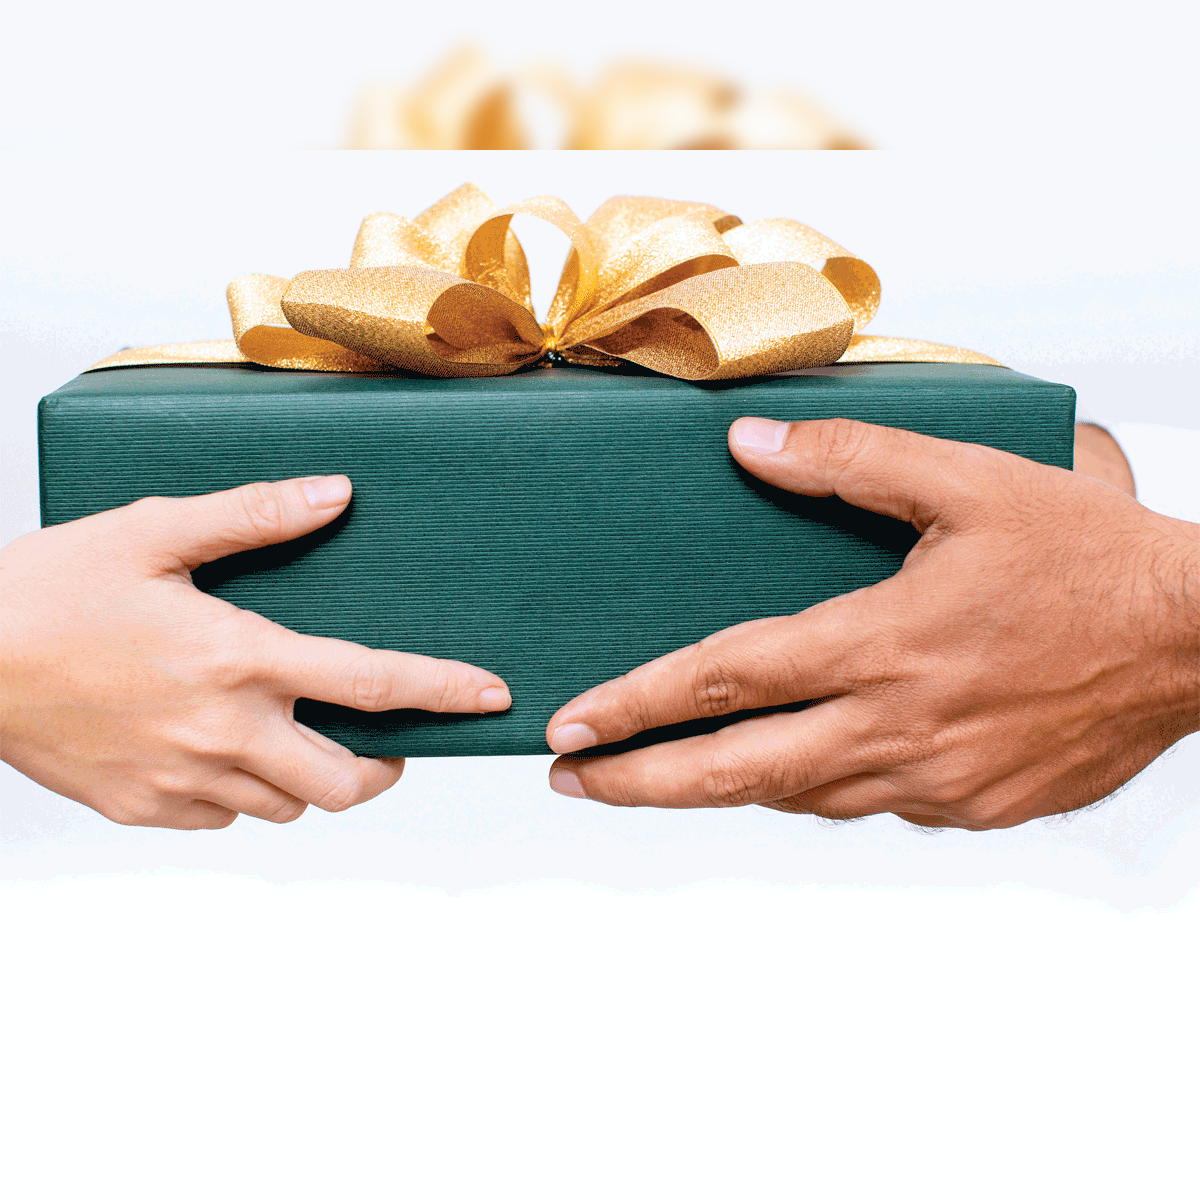 Are gifts received from relatives on Diwali subject to taxation?